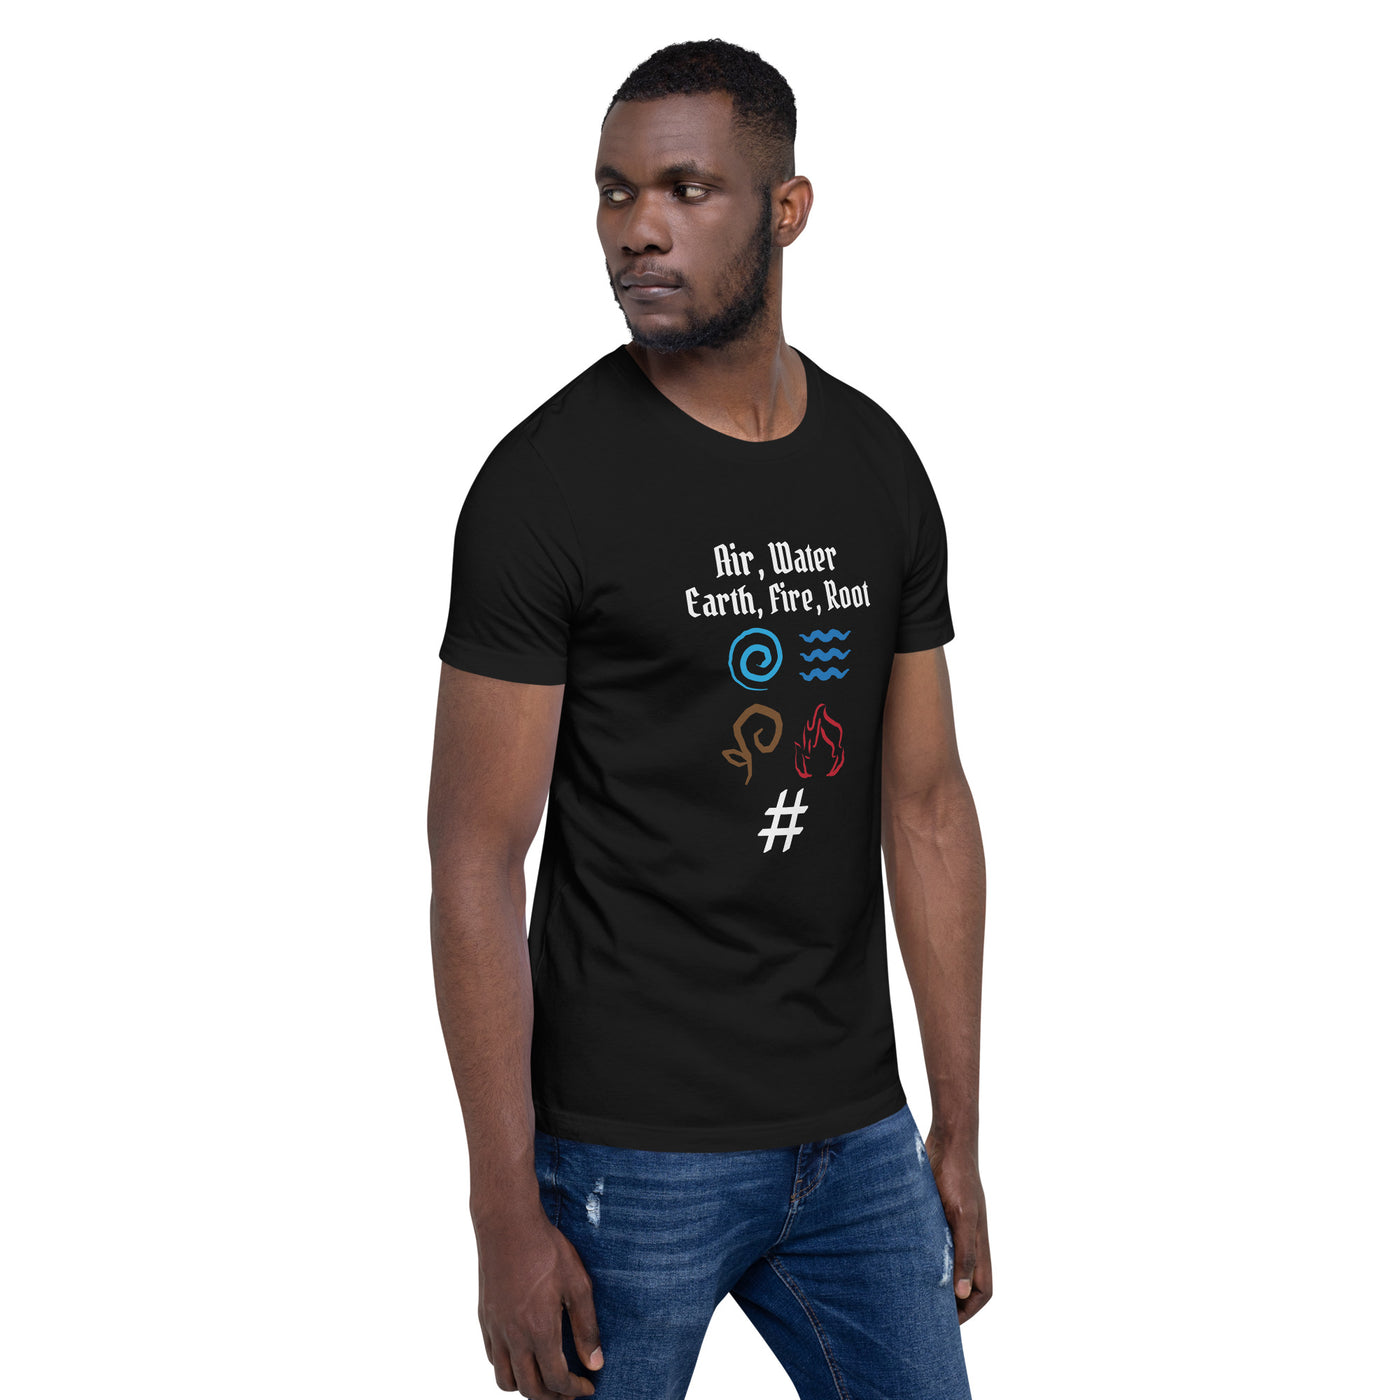 Air, Water, Earth, Fire, Root - Unisex t-shirt